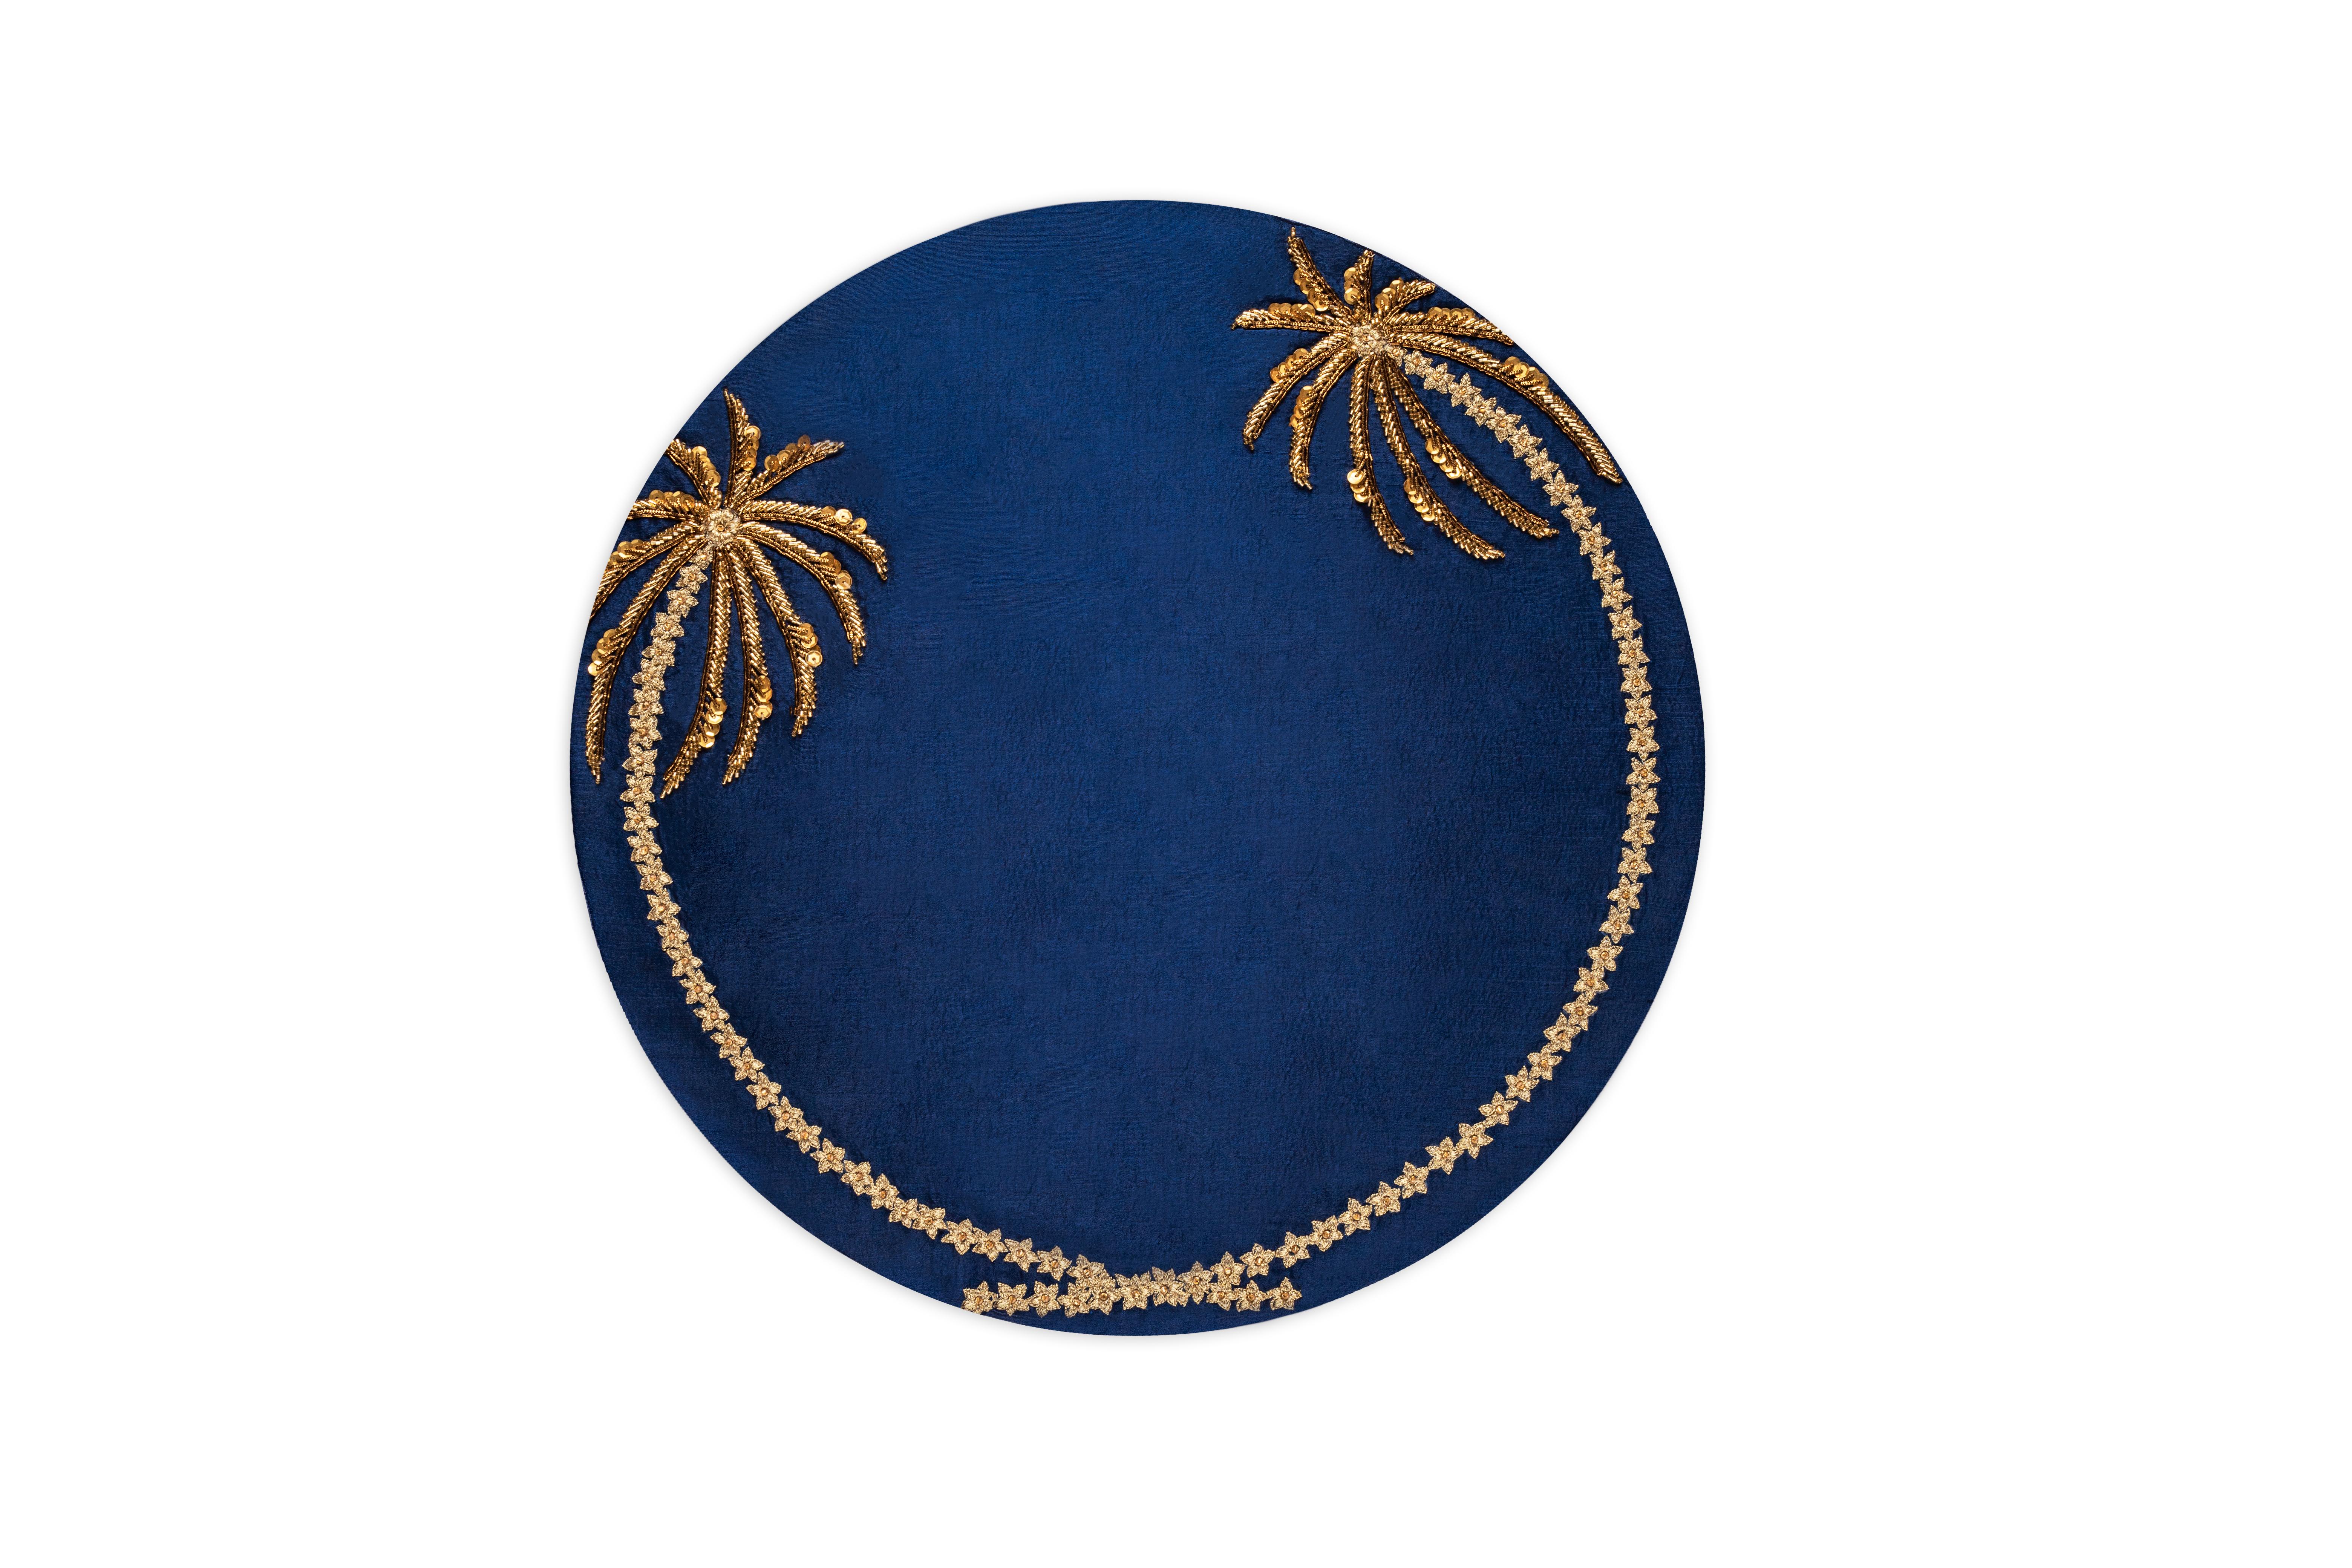 All hand made, Les Palmier placemat marries two palm trees to create a magnificent halo around your dinnerware. The trunks are intricately embroidered with gold threads while the palm leaves are fashioned with beadwork.